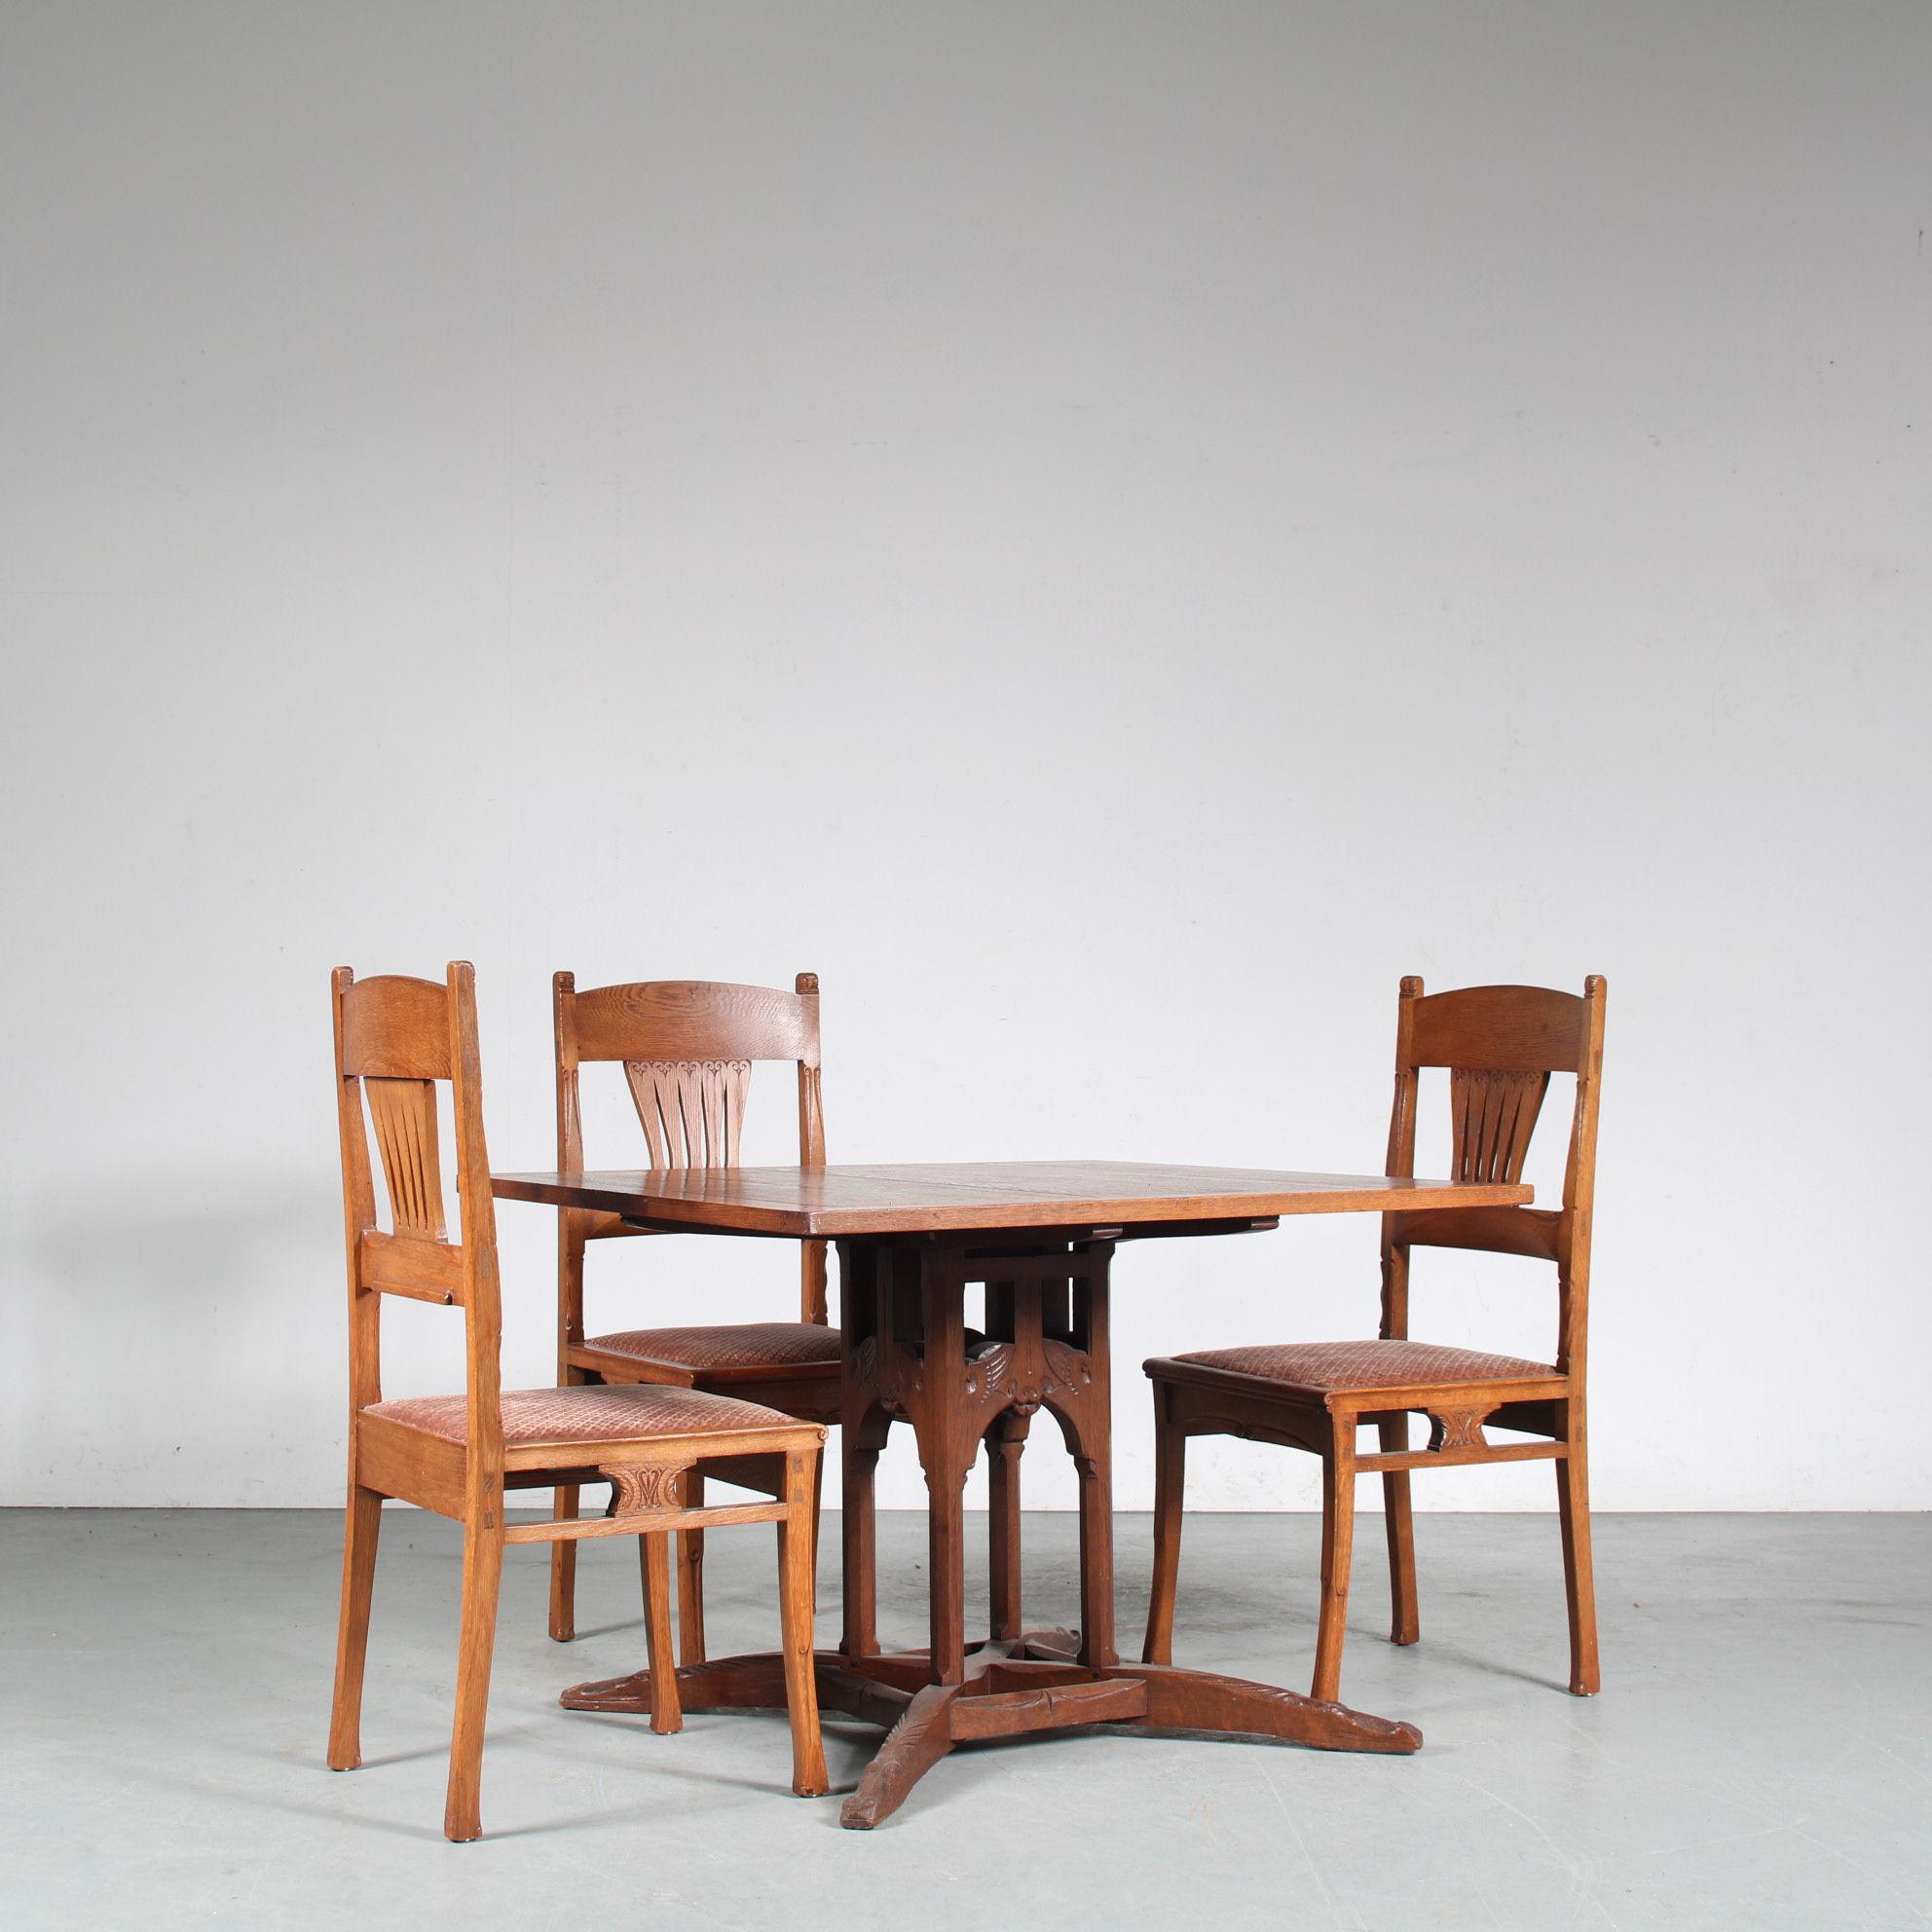 A beautiful dining set, designed by Gerrit Willem Dijsselhof and manufactured in the Netherlands around 1900.

The set contains one dining table and three chairs. Made of the highest quality oak wood in a nice, warm brown colour. The seats of the